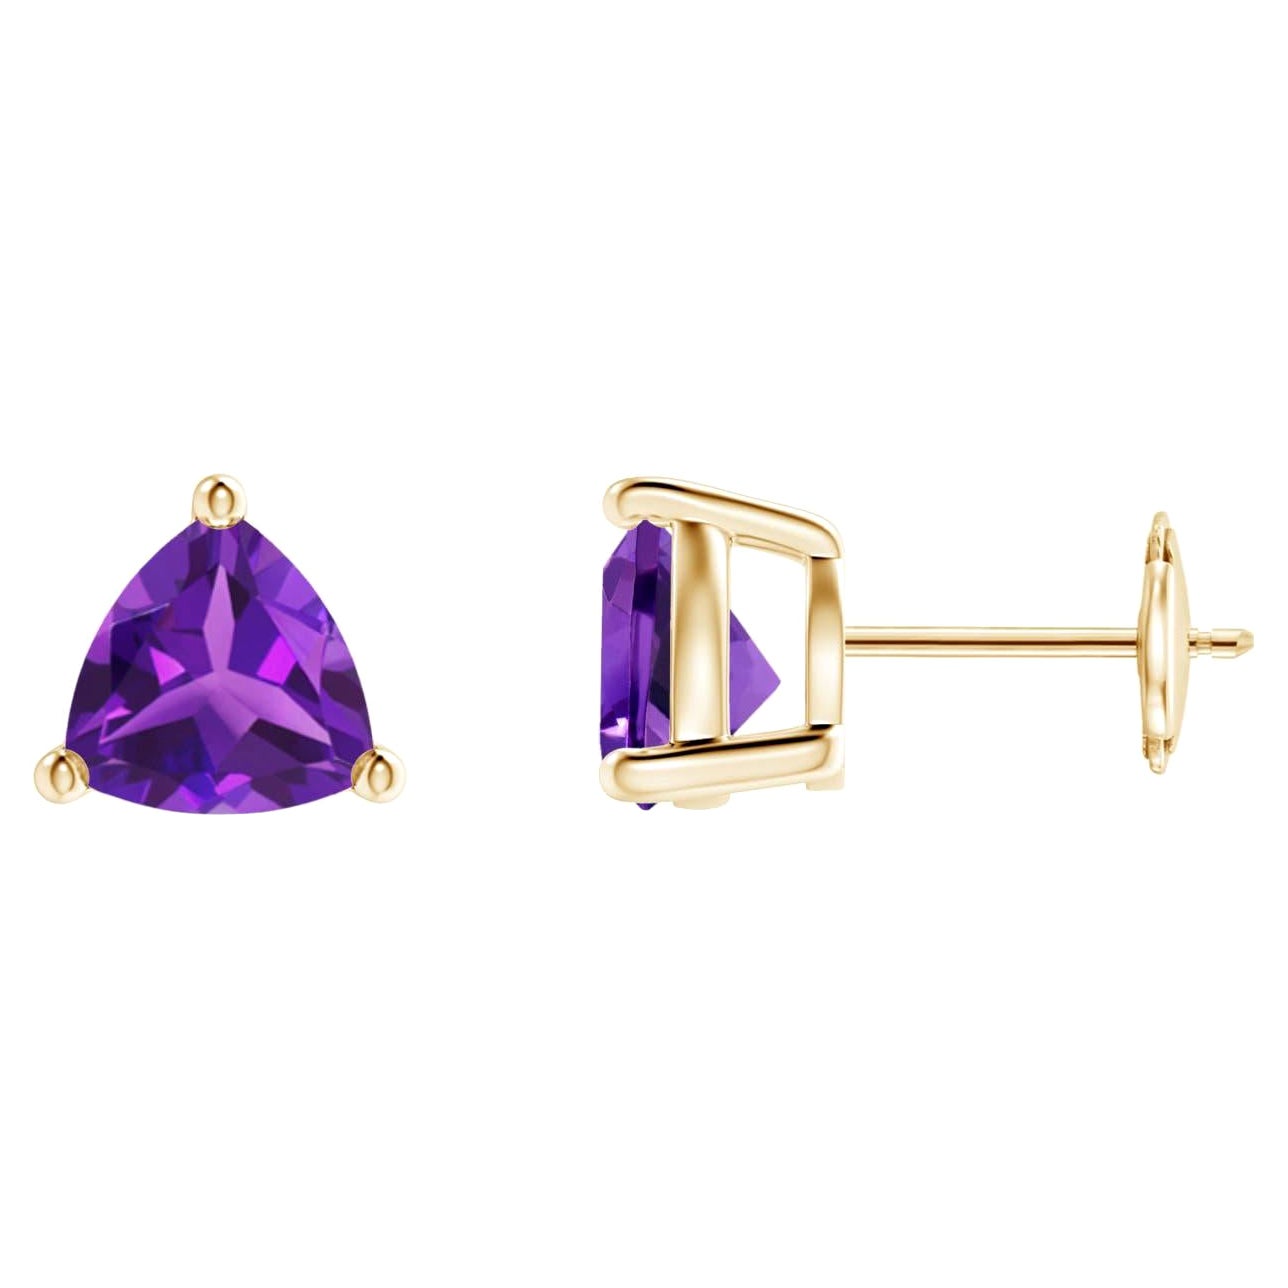 Natural Trillion 2.2ct Amethyst Stud Earrings in 14K Yellow Gold